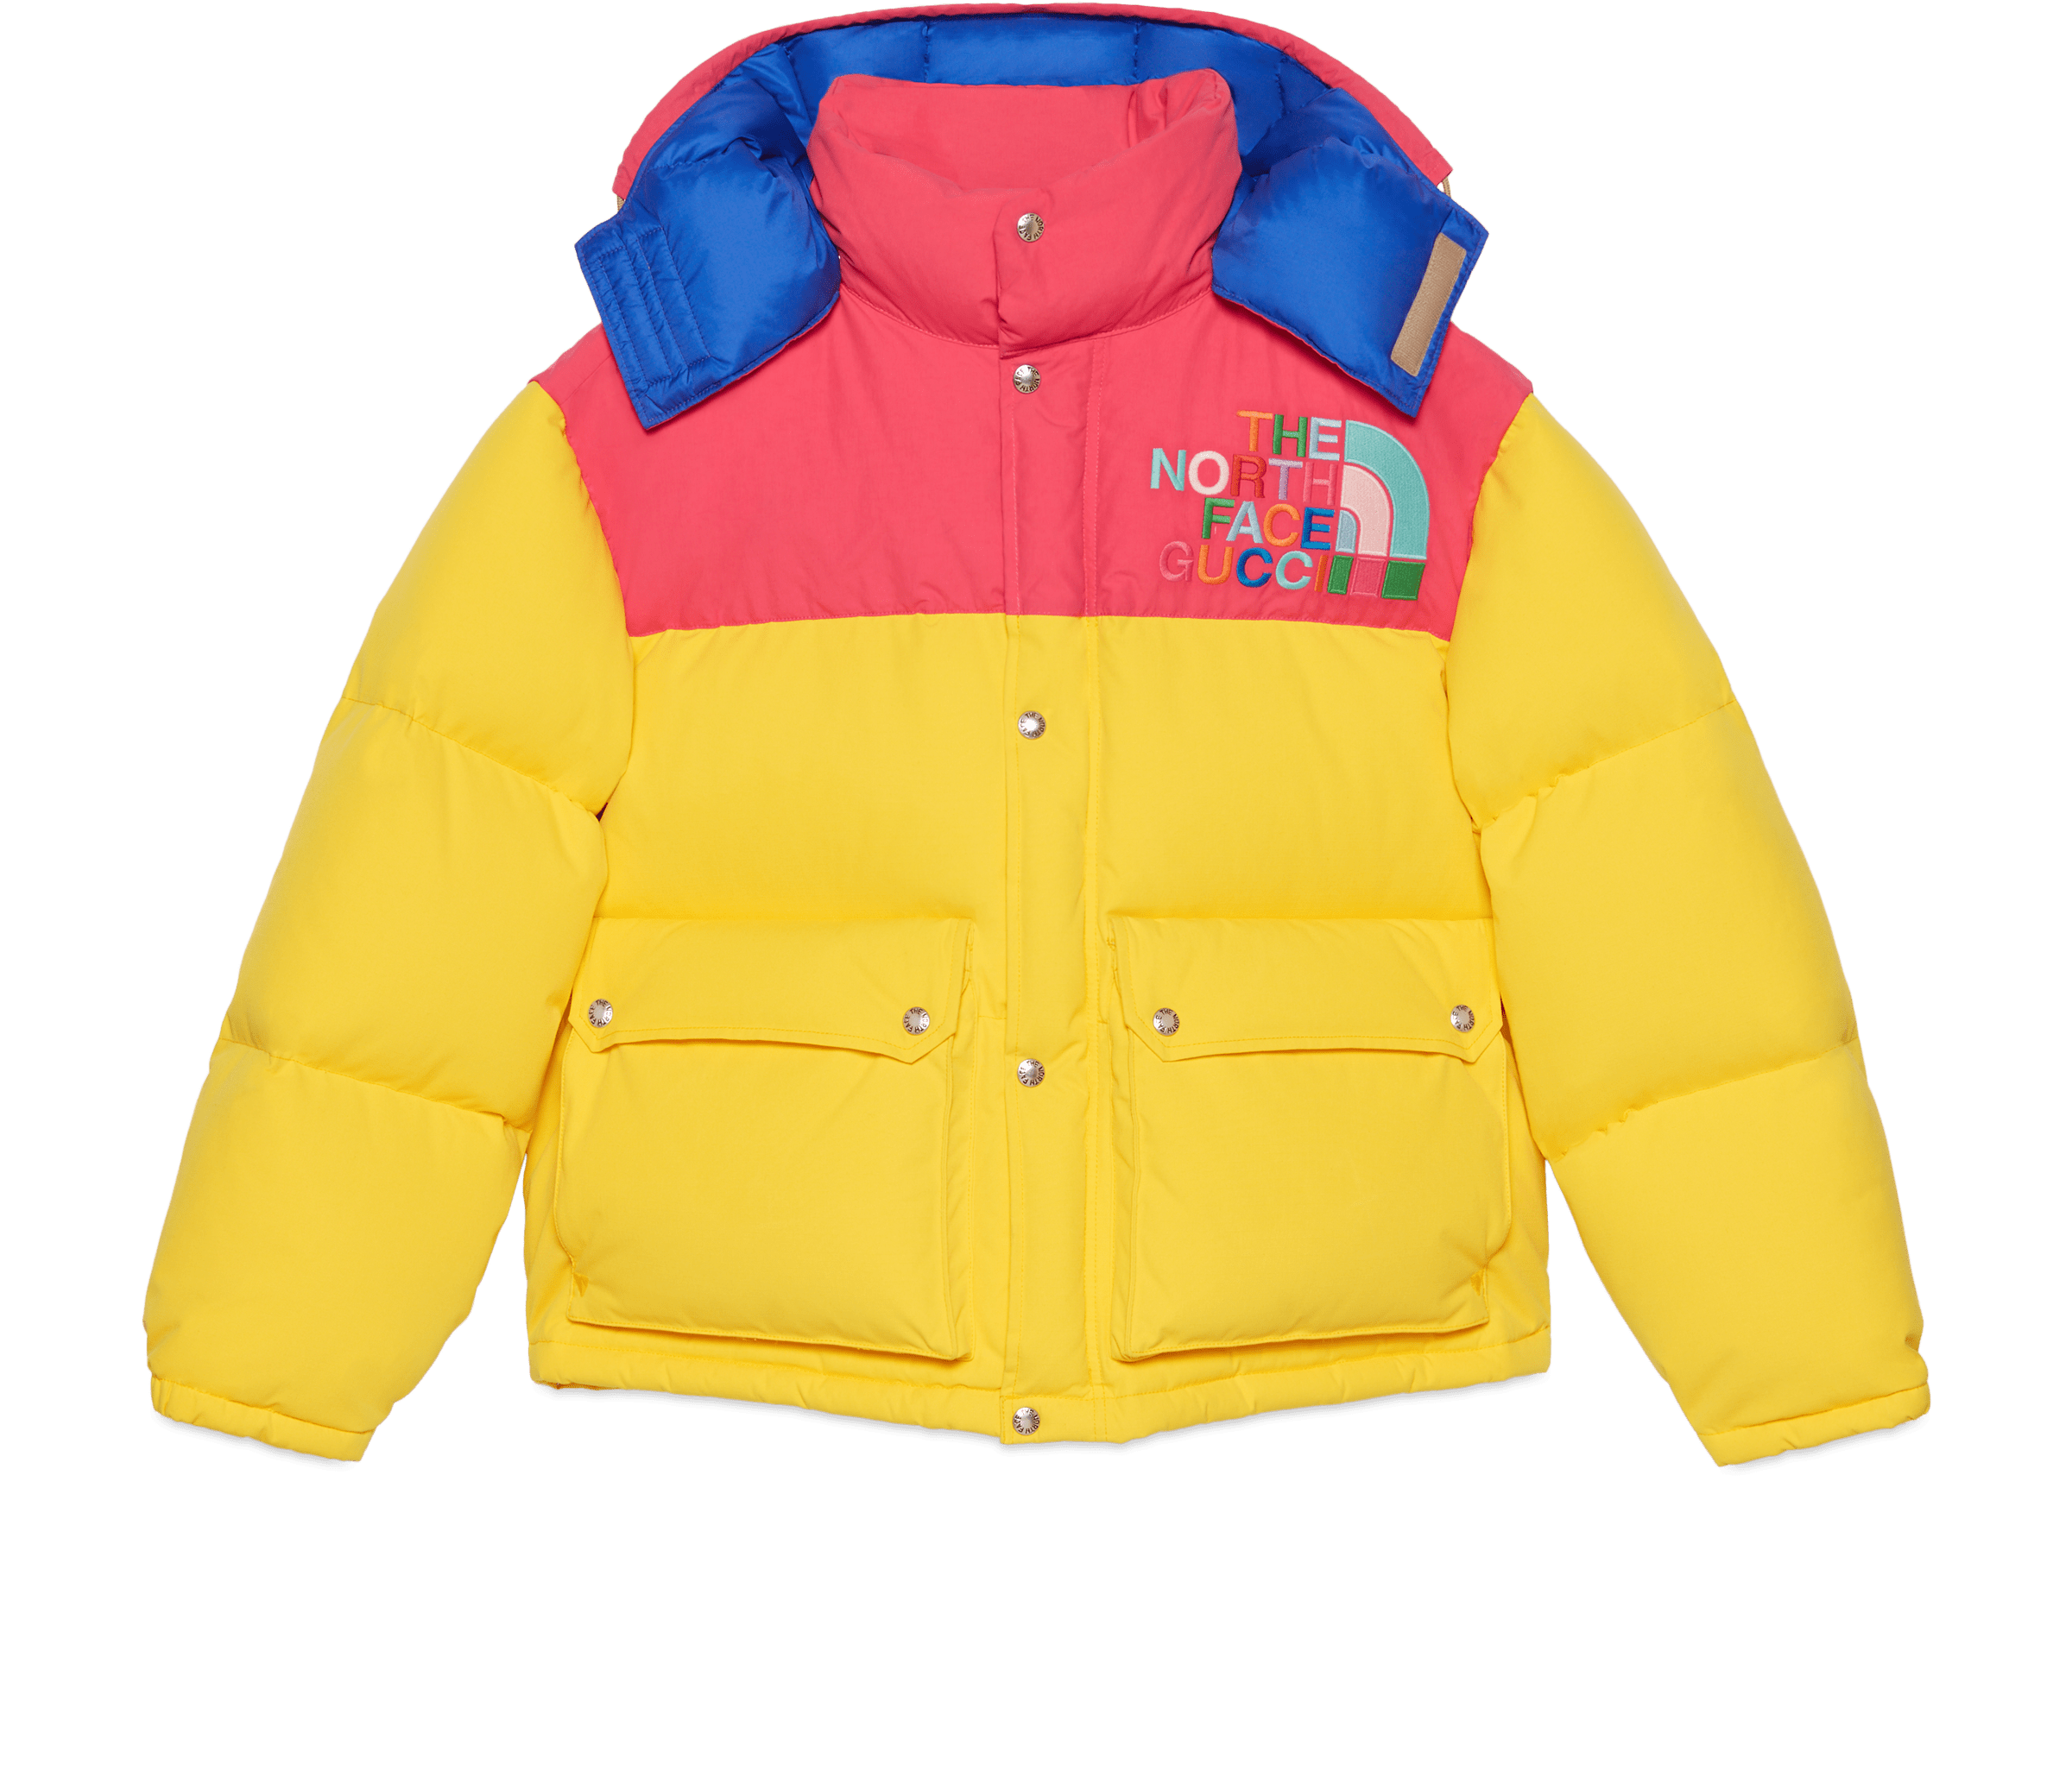 Product image for the new The North Face and Gucci collection